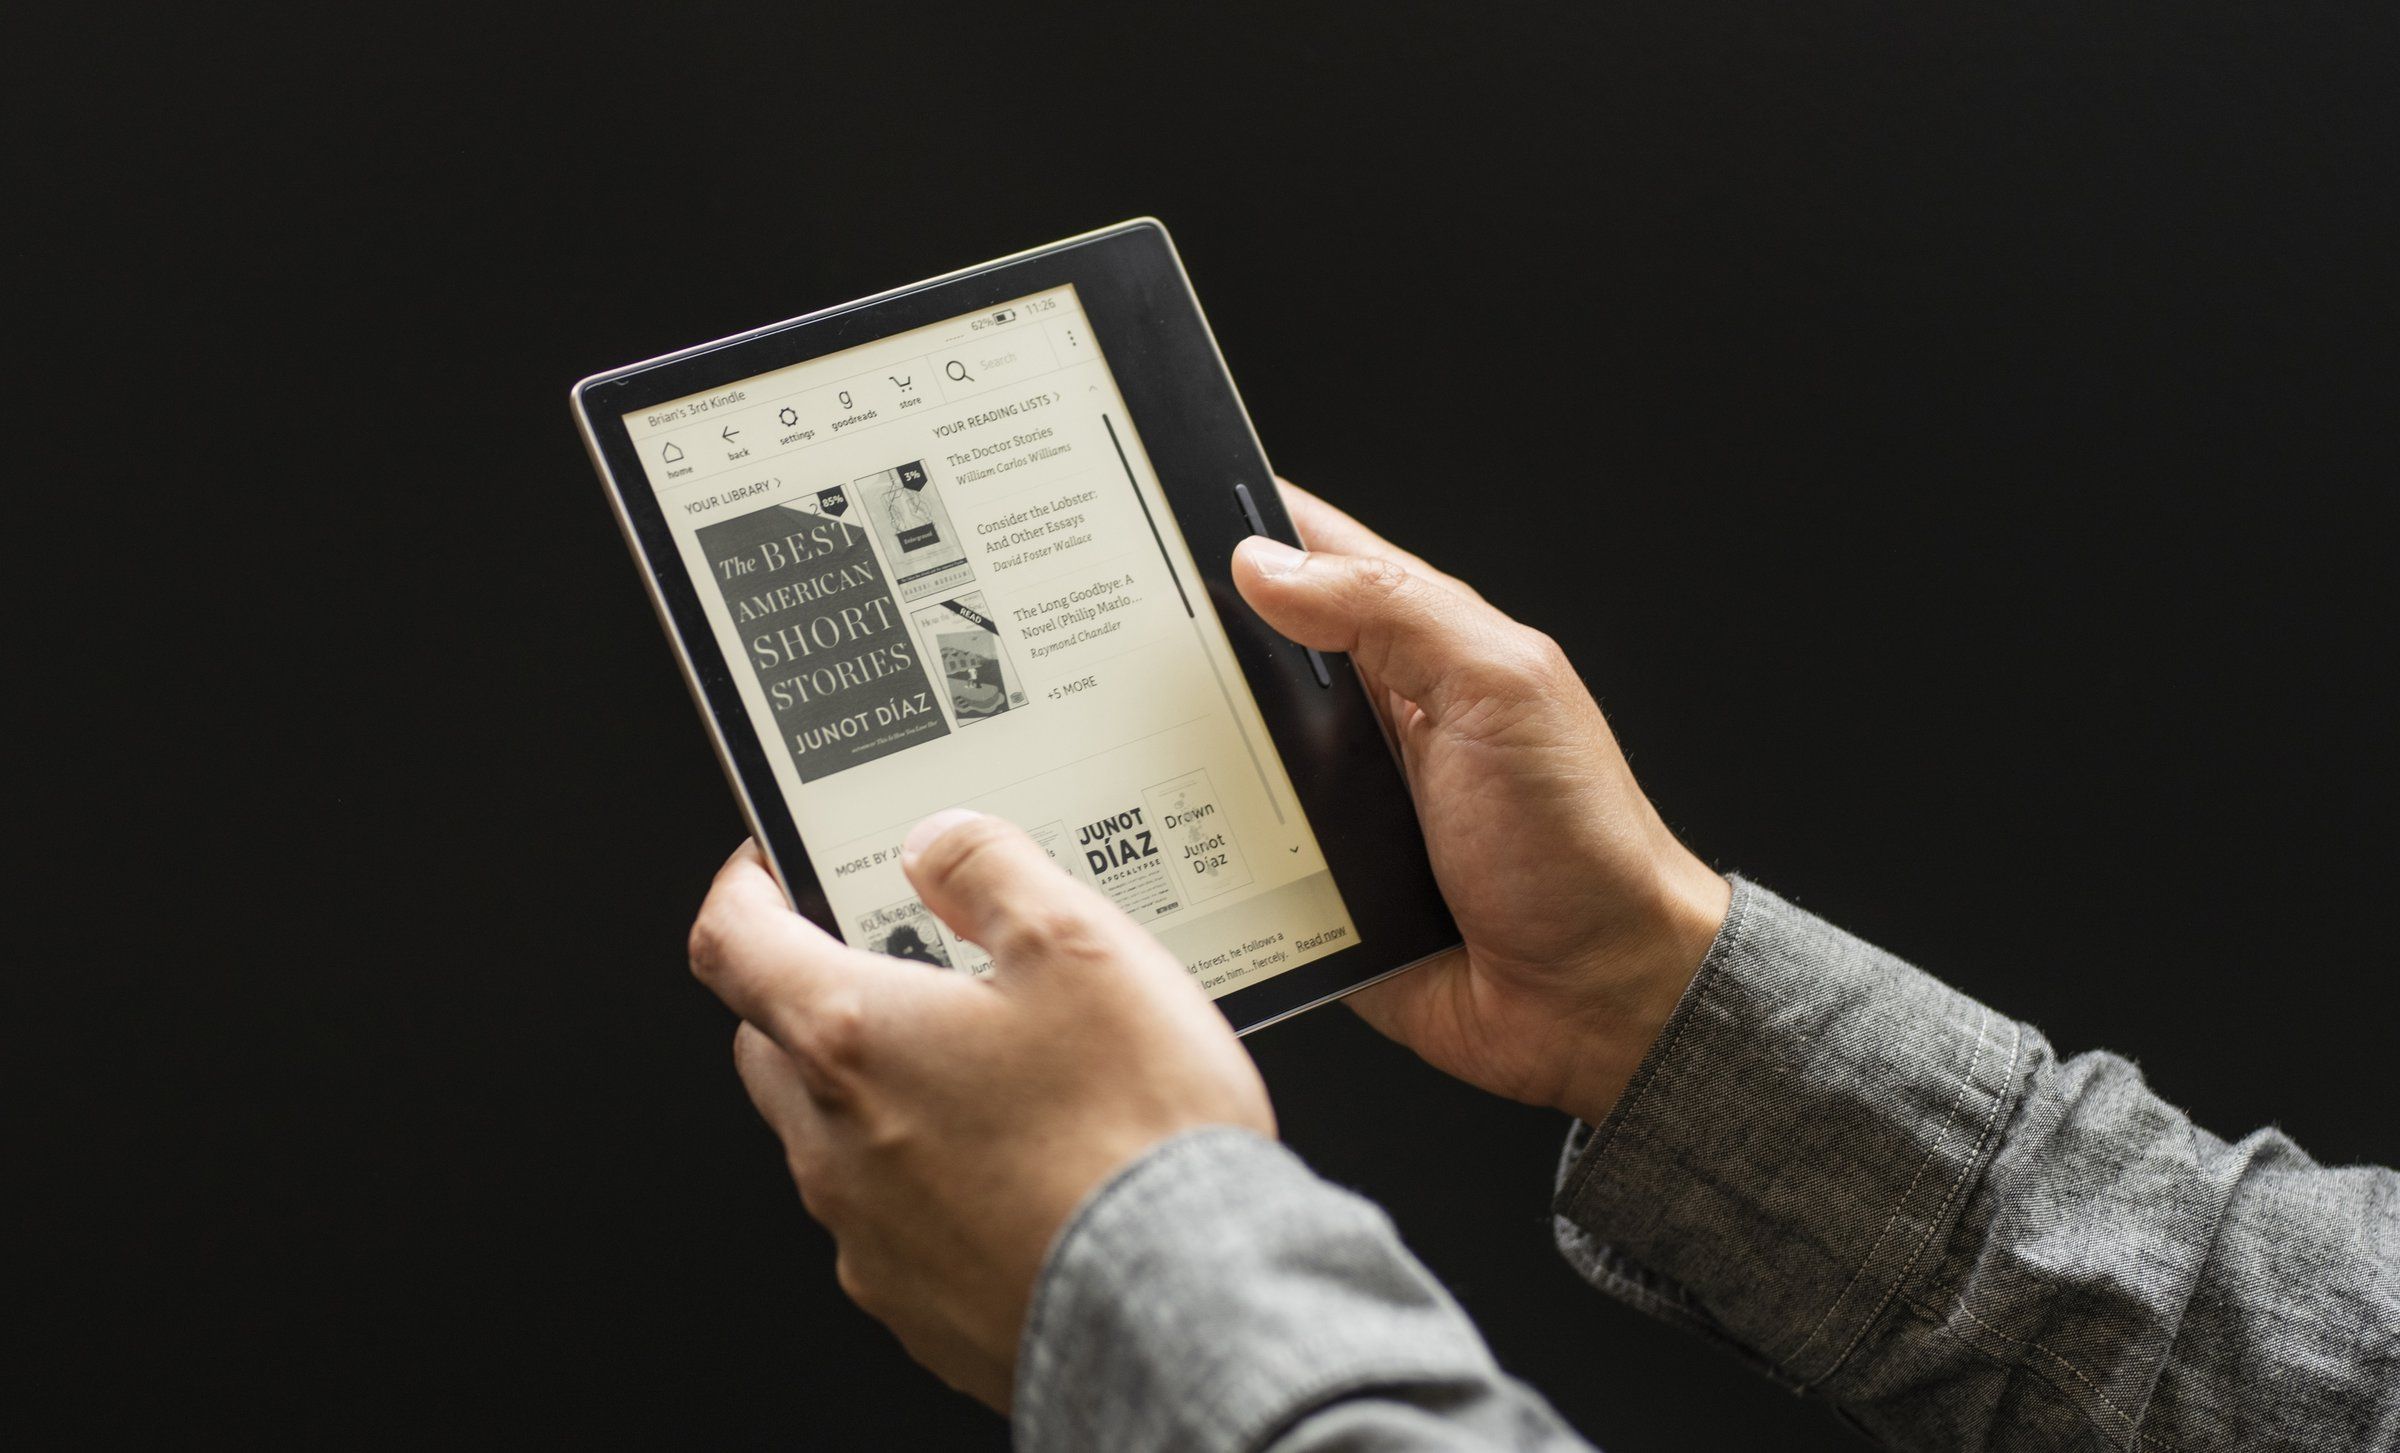 Amazon Kindle Oasis review: Now is the perfect time to buy an e